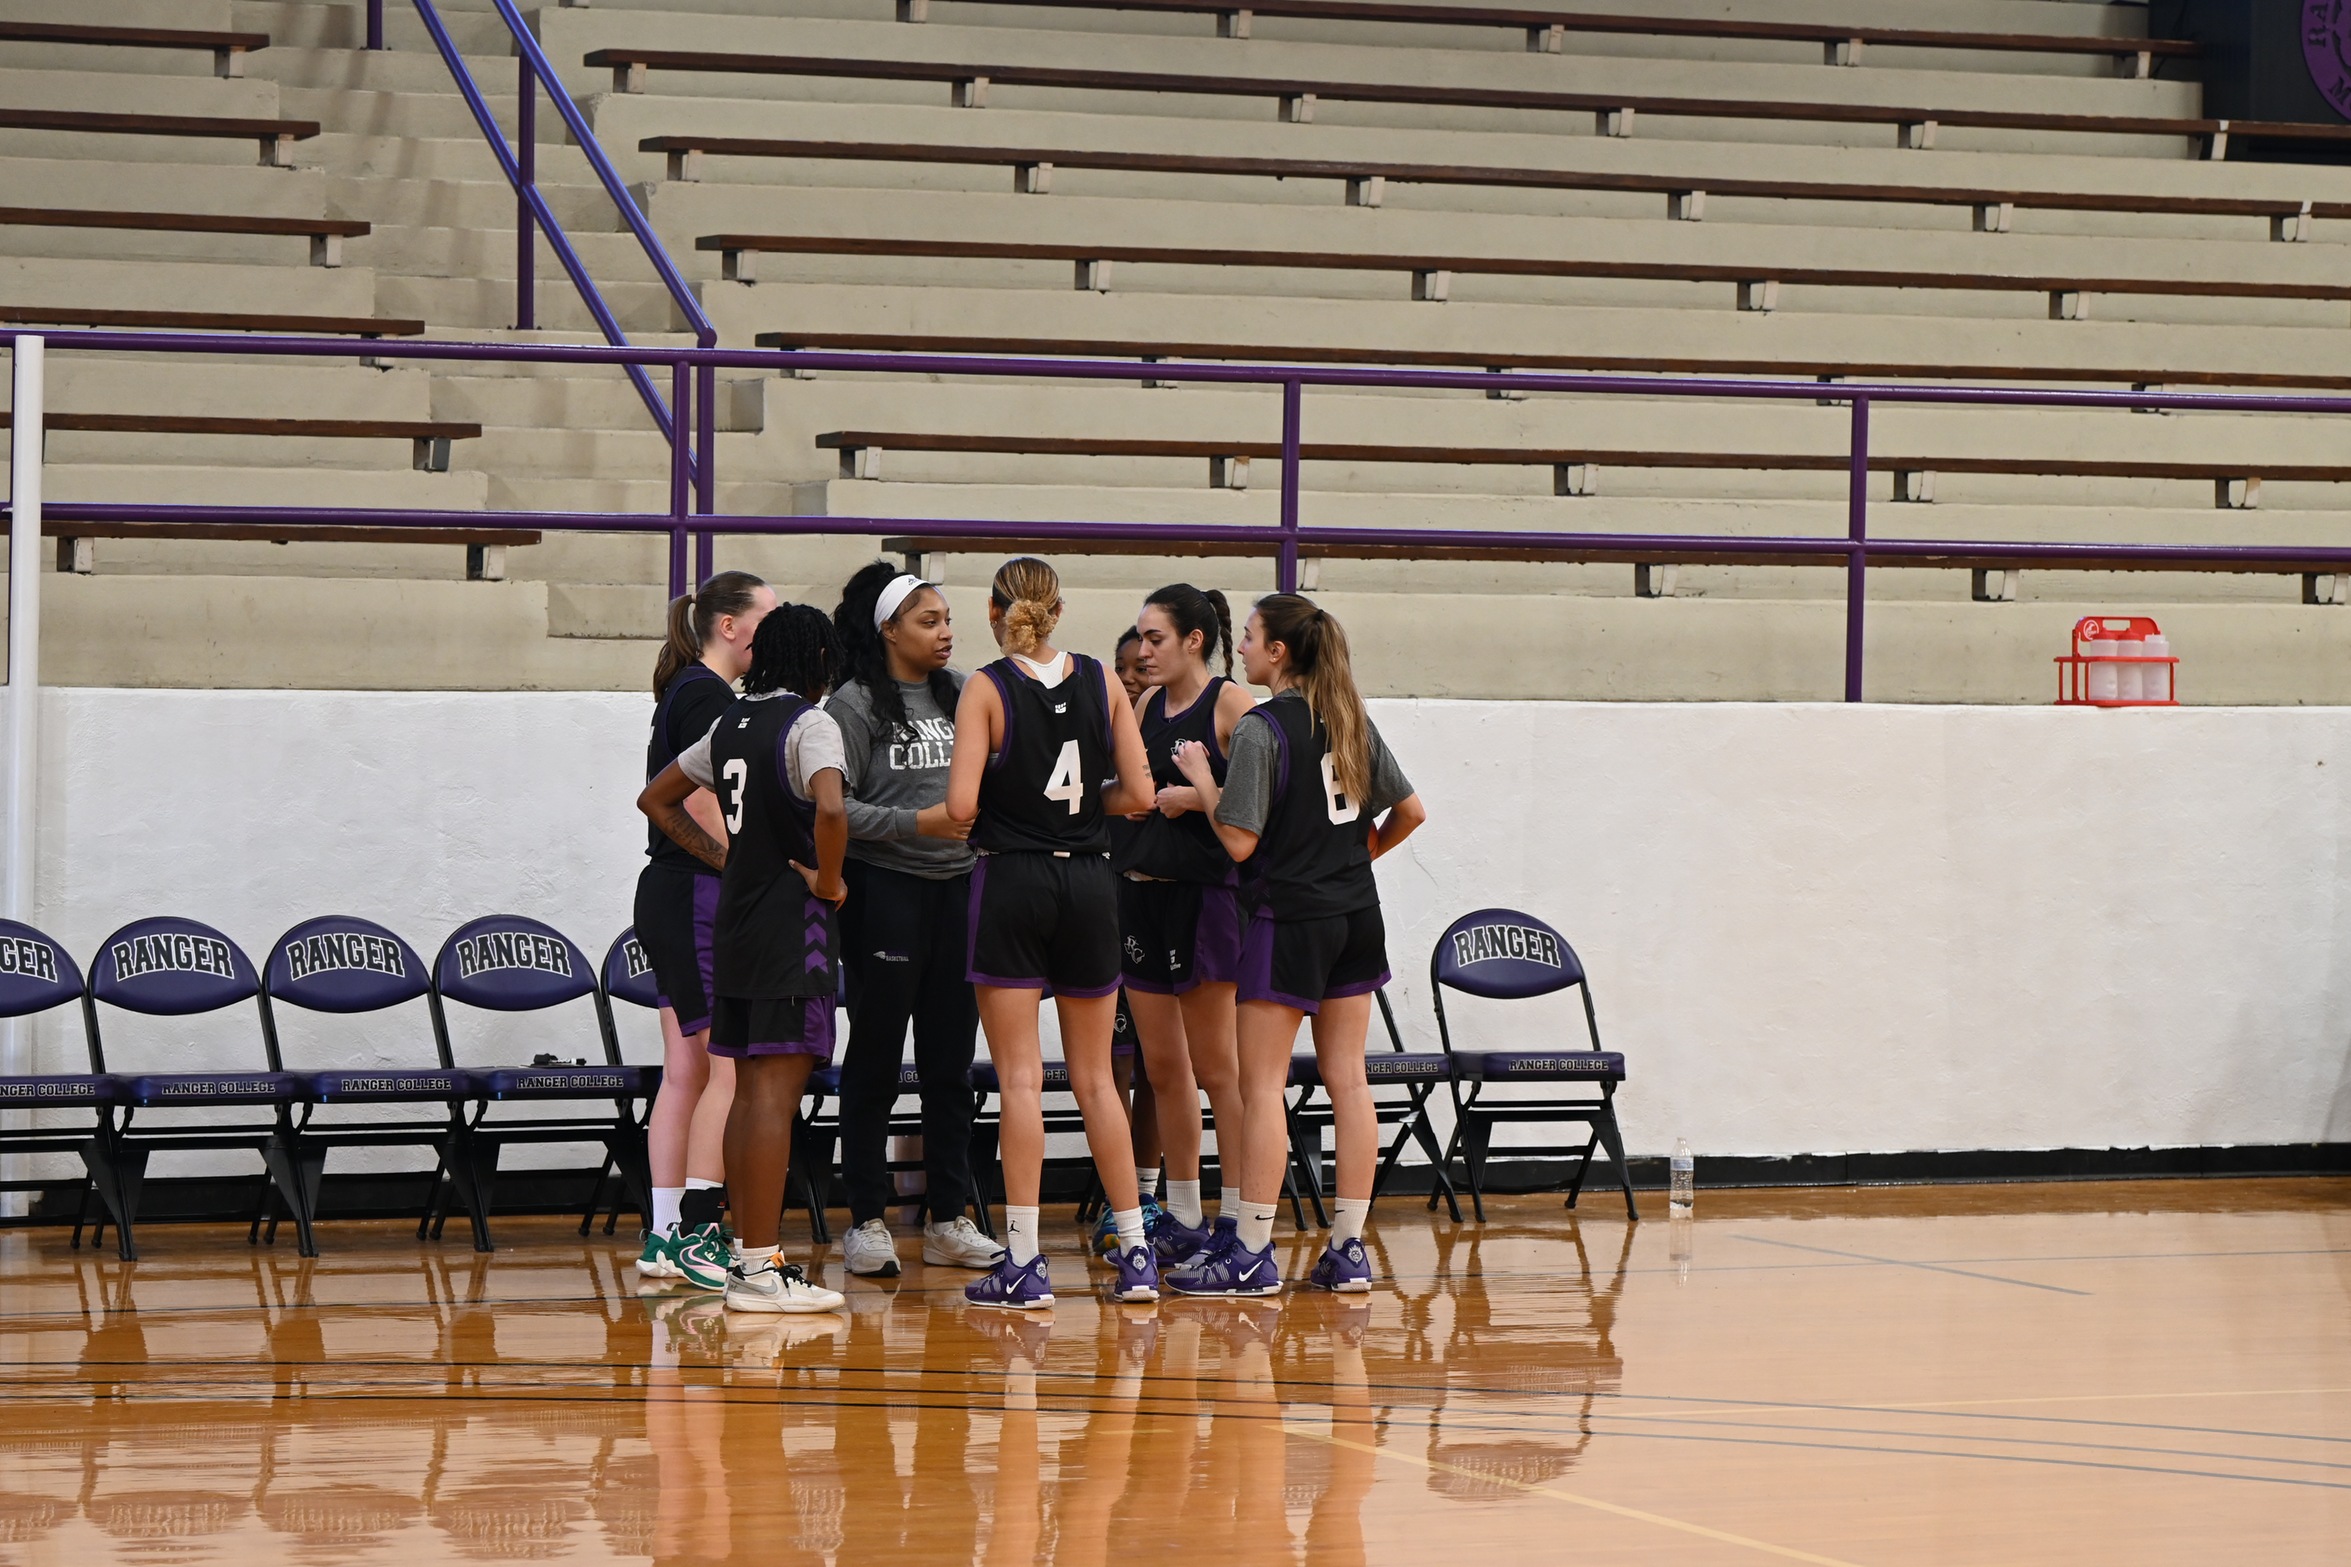 Southwestern Christian College defeated Ranger College with a final score of 61-51